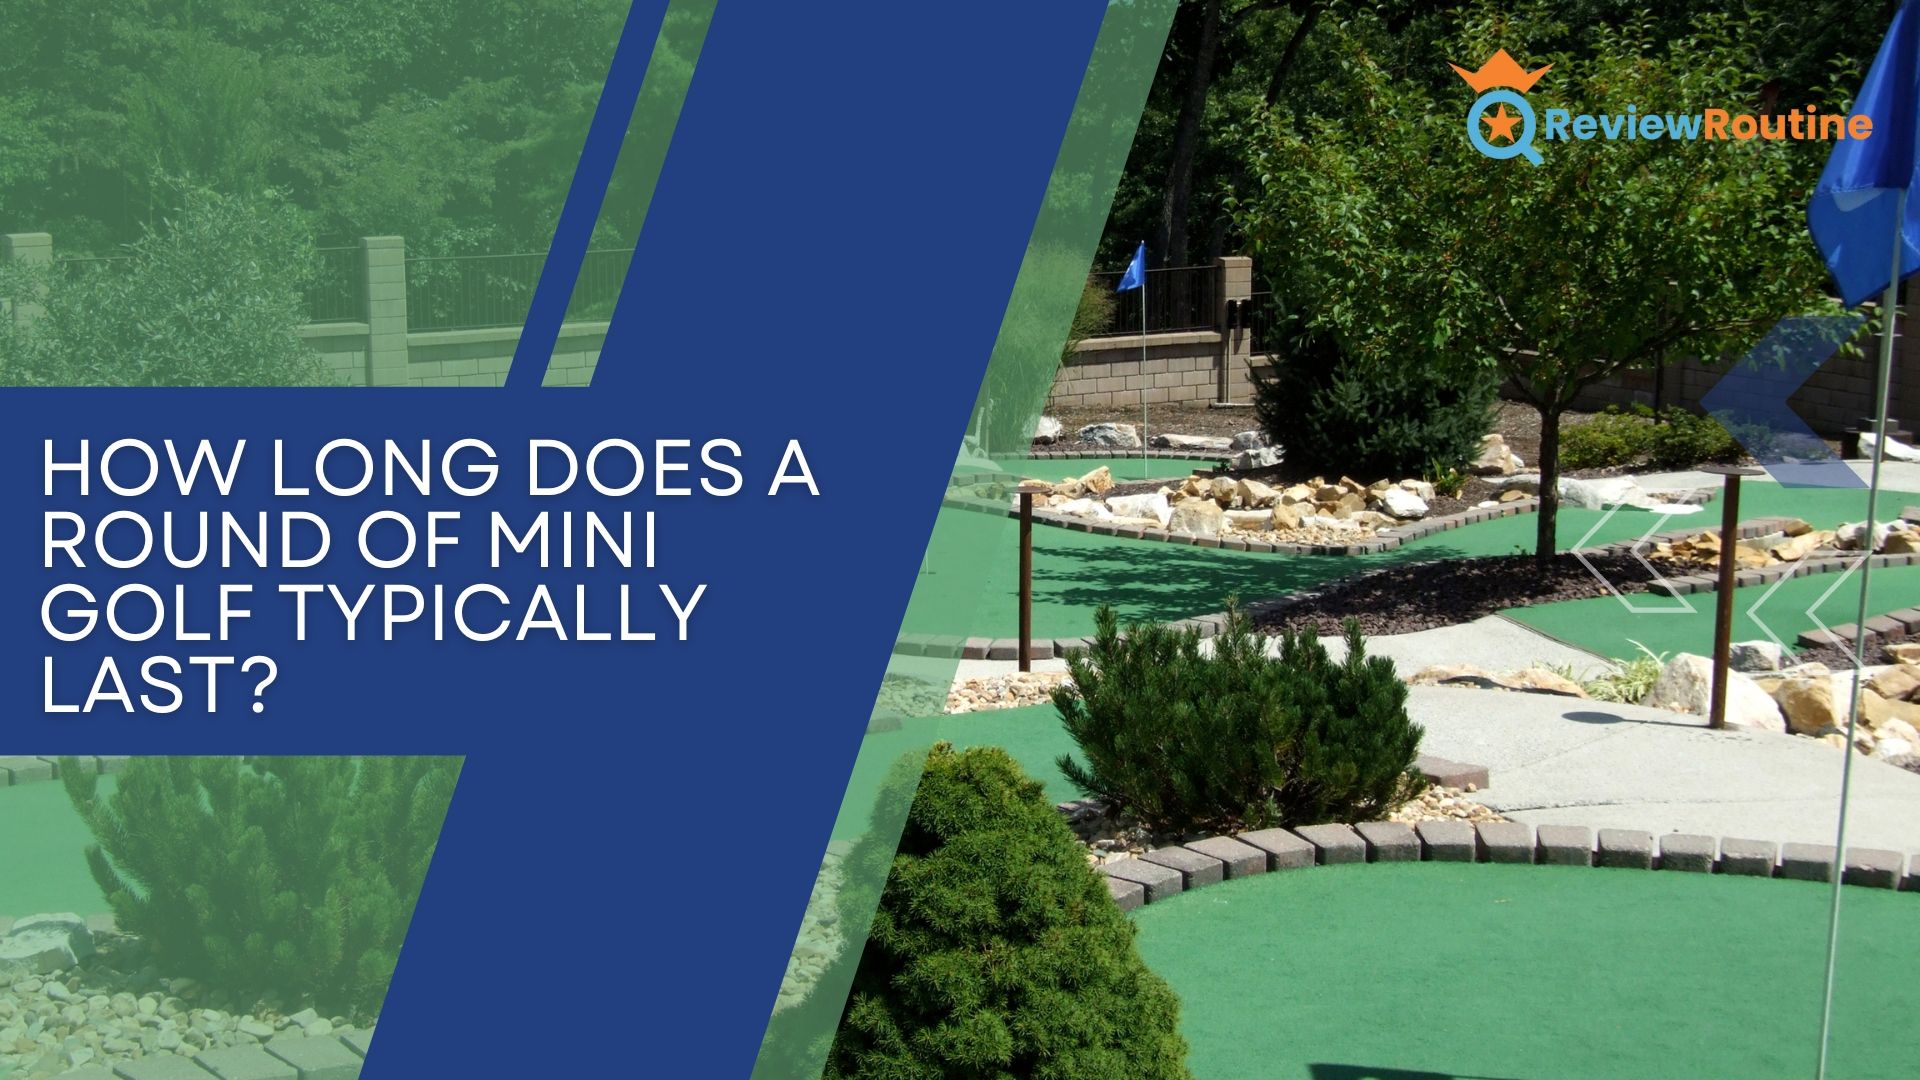 How Long Does a Round of Mini Golf Typically Last?